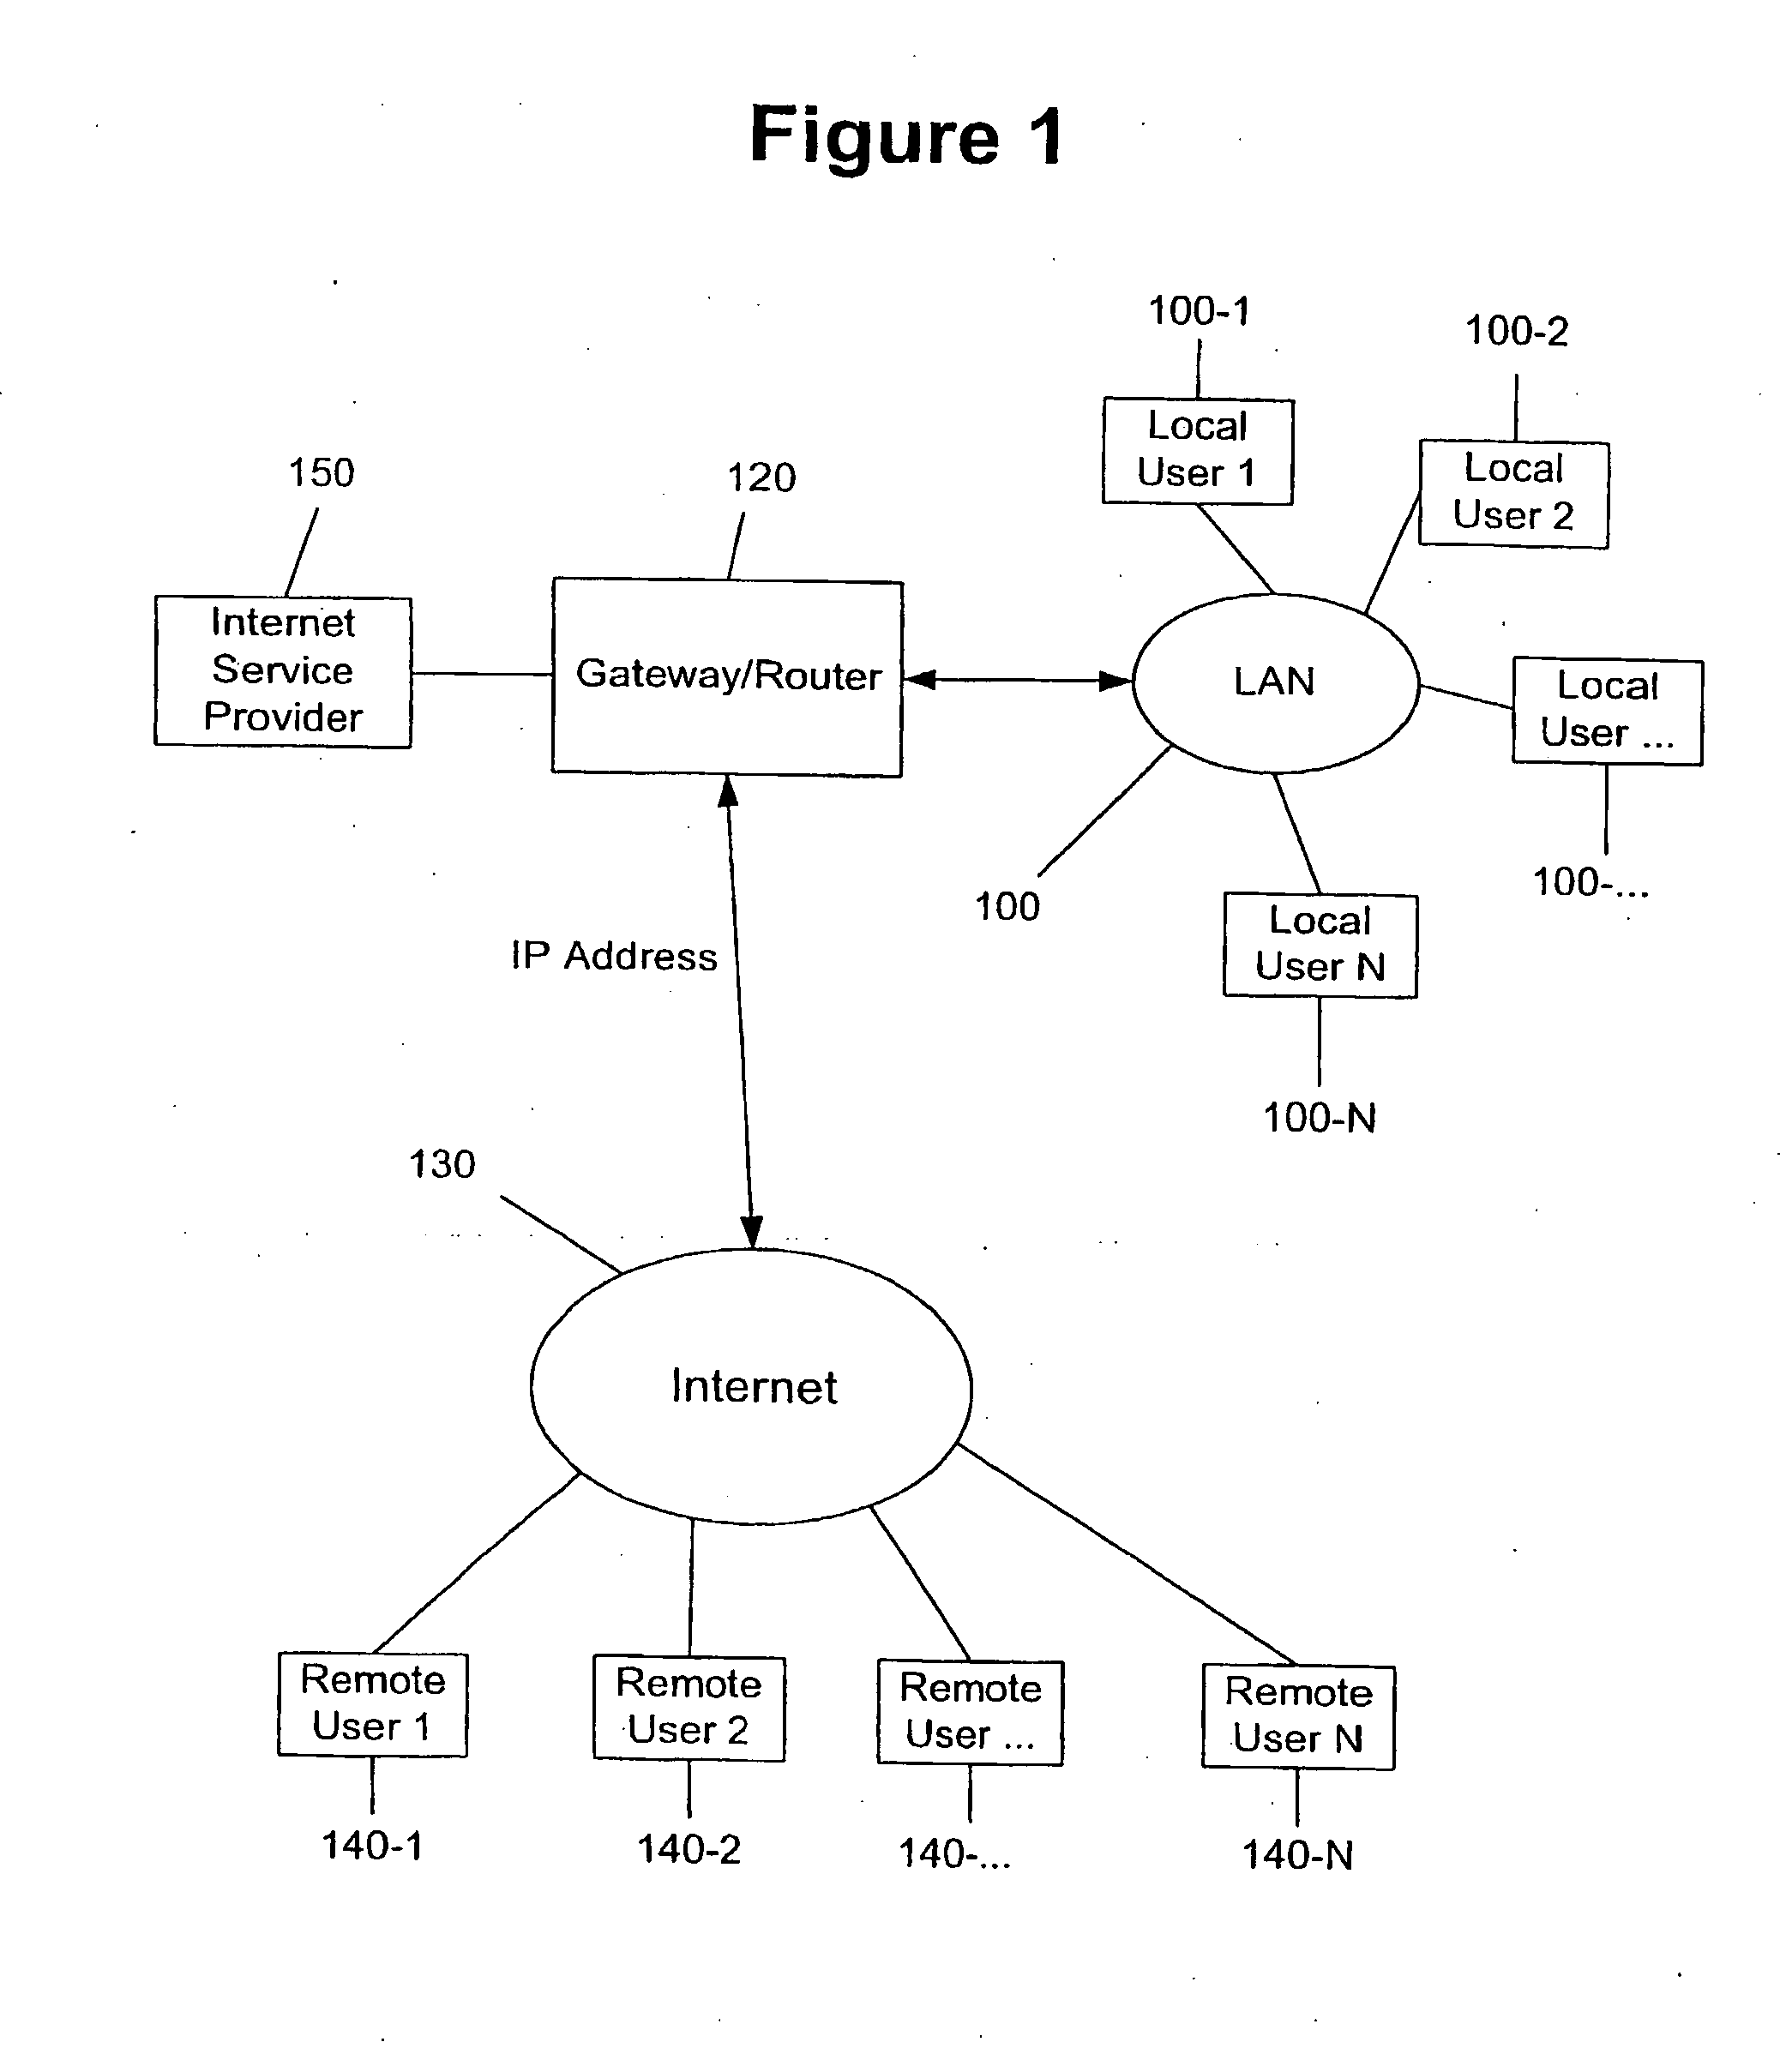 System and method for automatically configuring remote computer